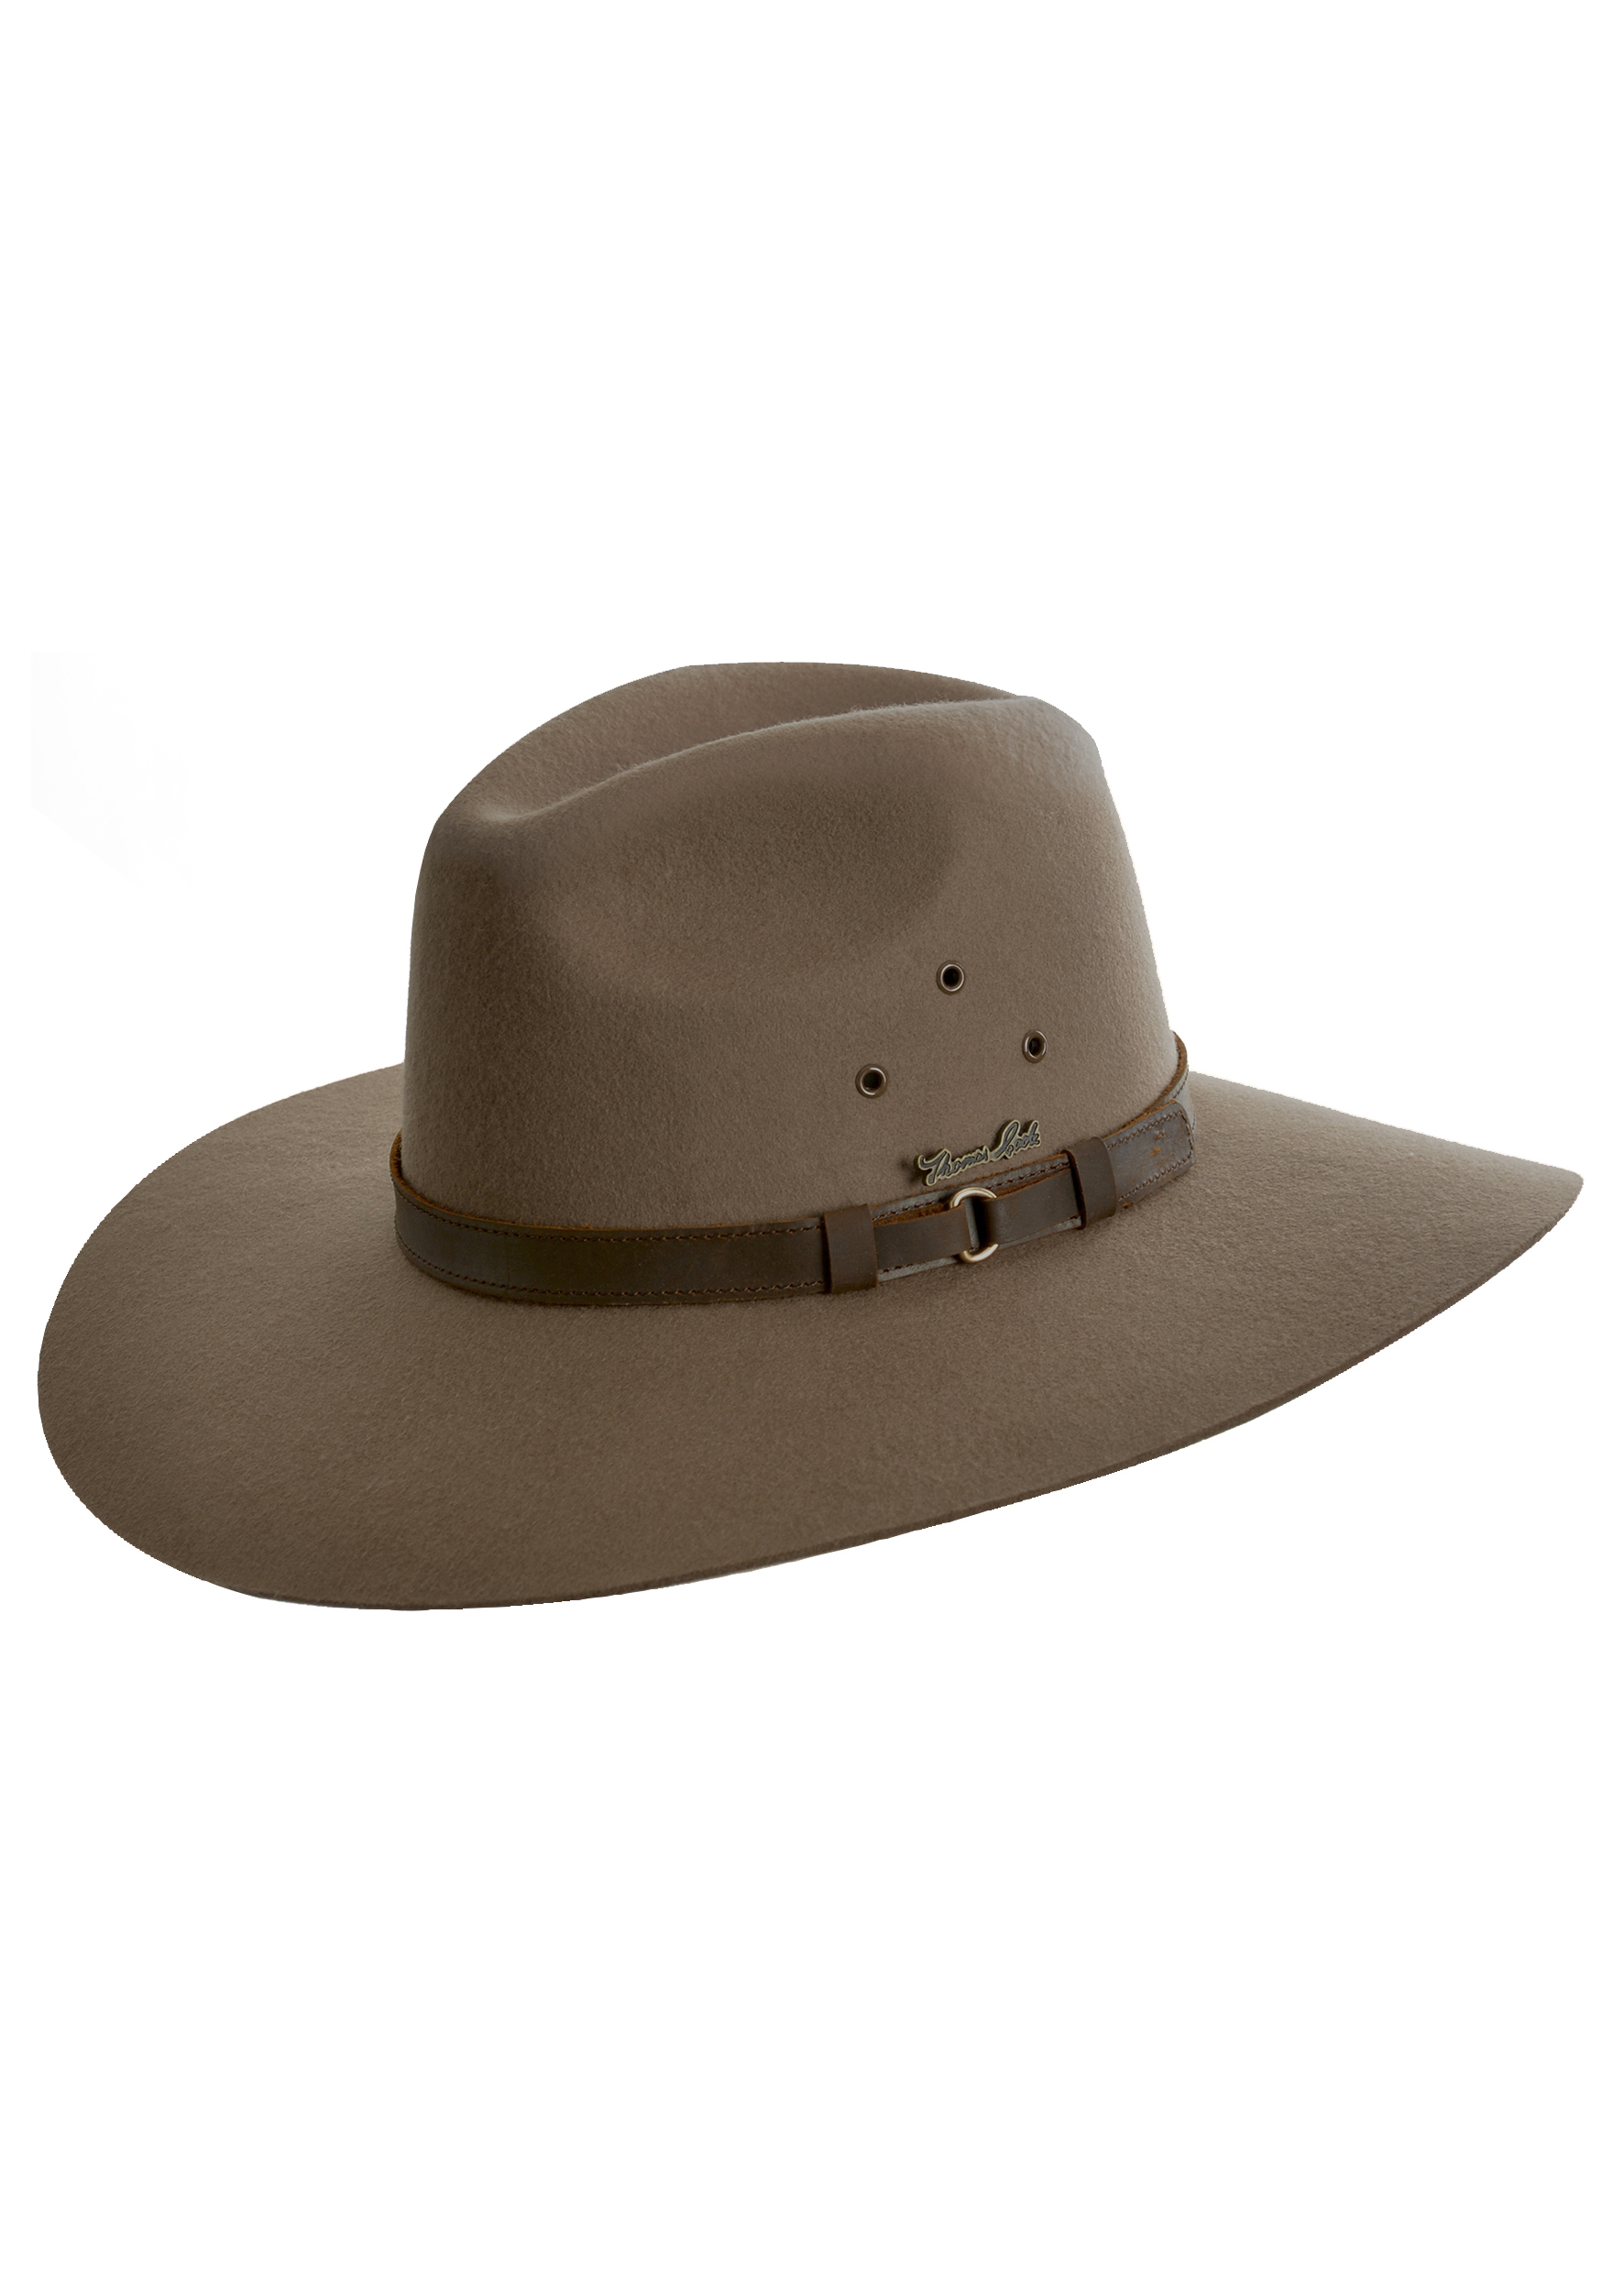 TCP1935002 Thomas Cook Highlands Hat